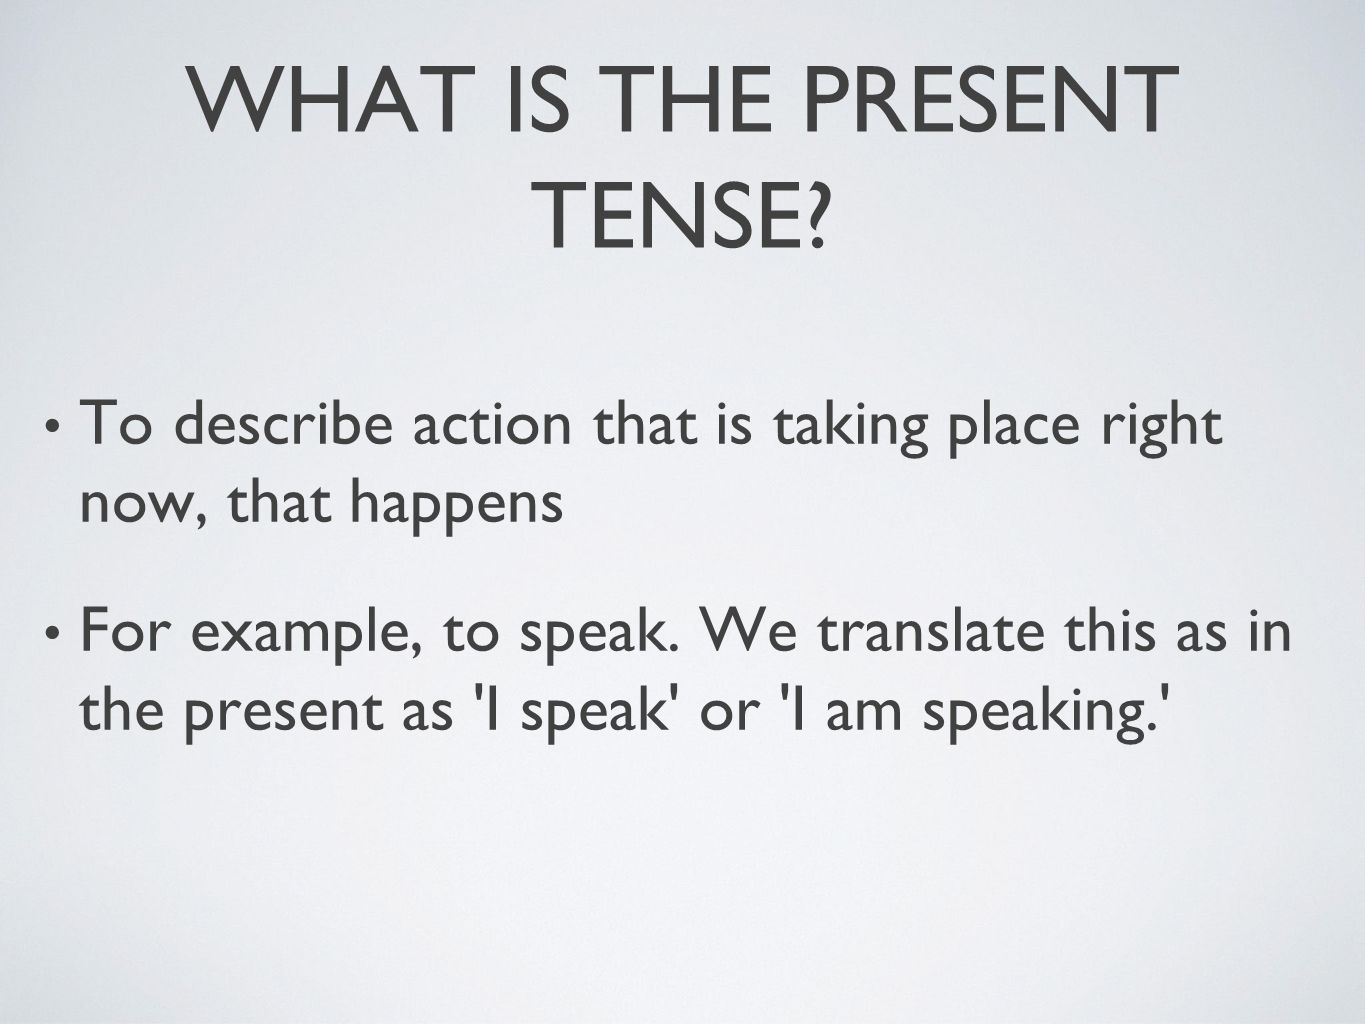 WHAT IS THE PRESENT TENSE